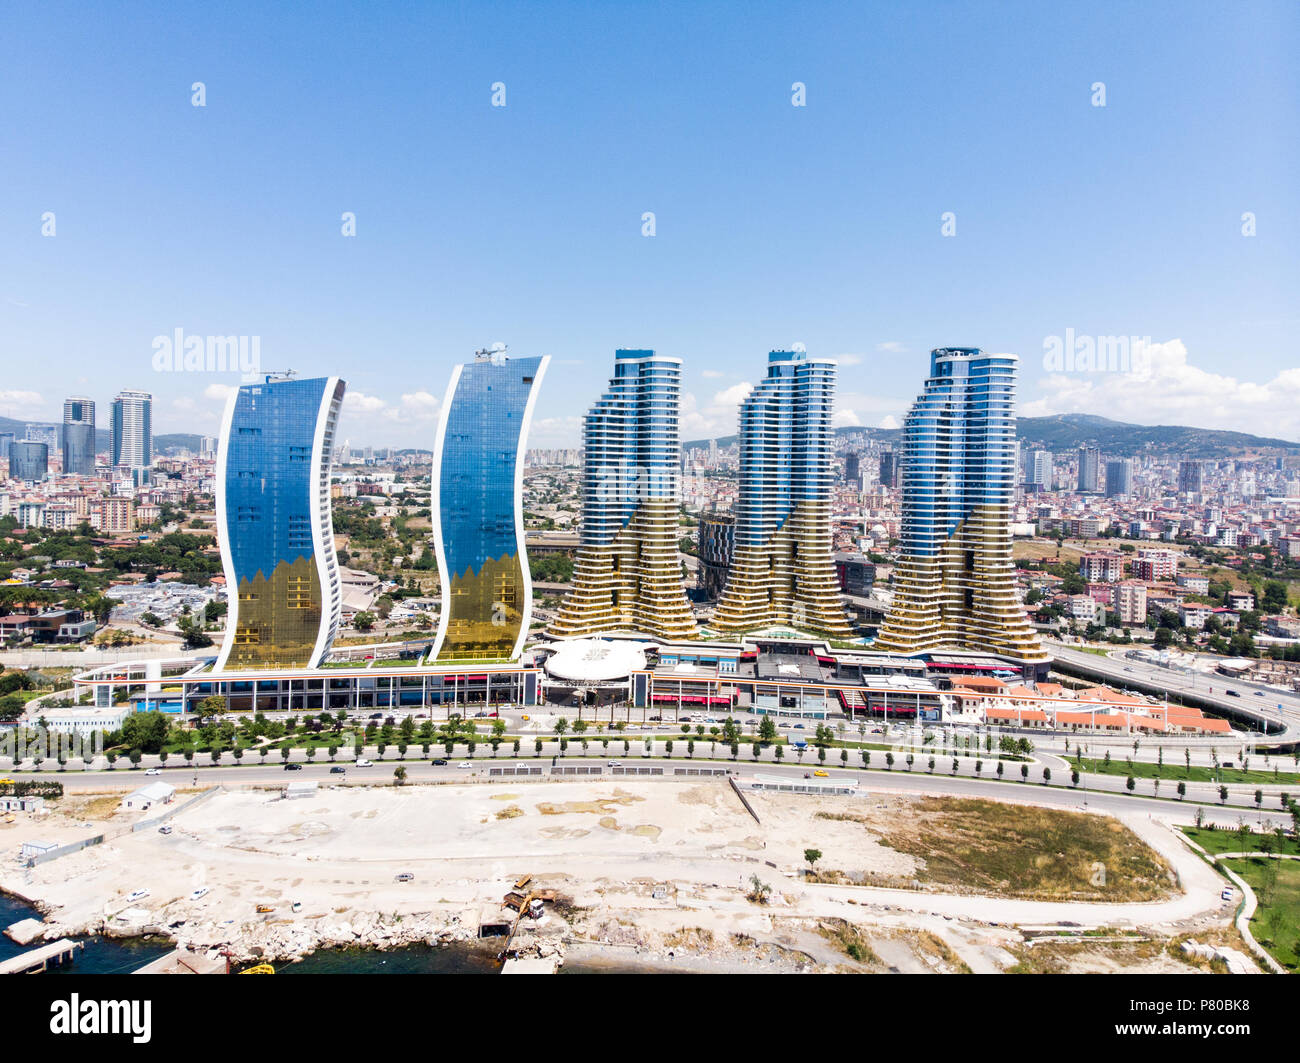 Mall Interior Aerial View High Resolution Stock Photography and Images -  Alamy